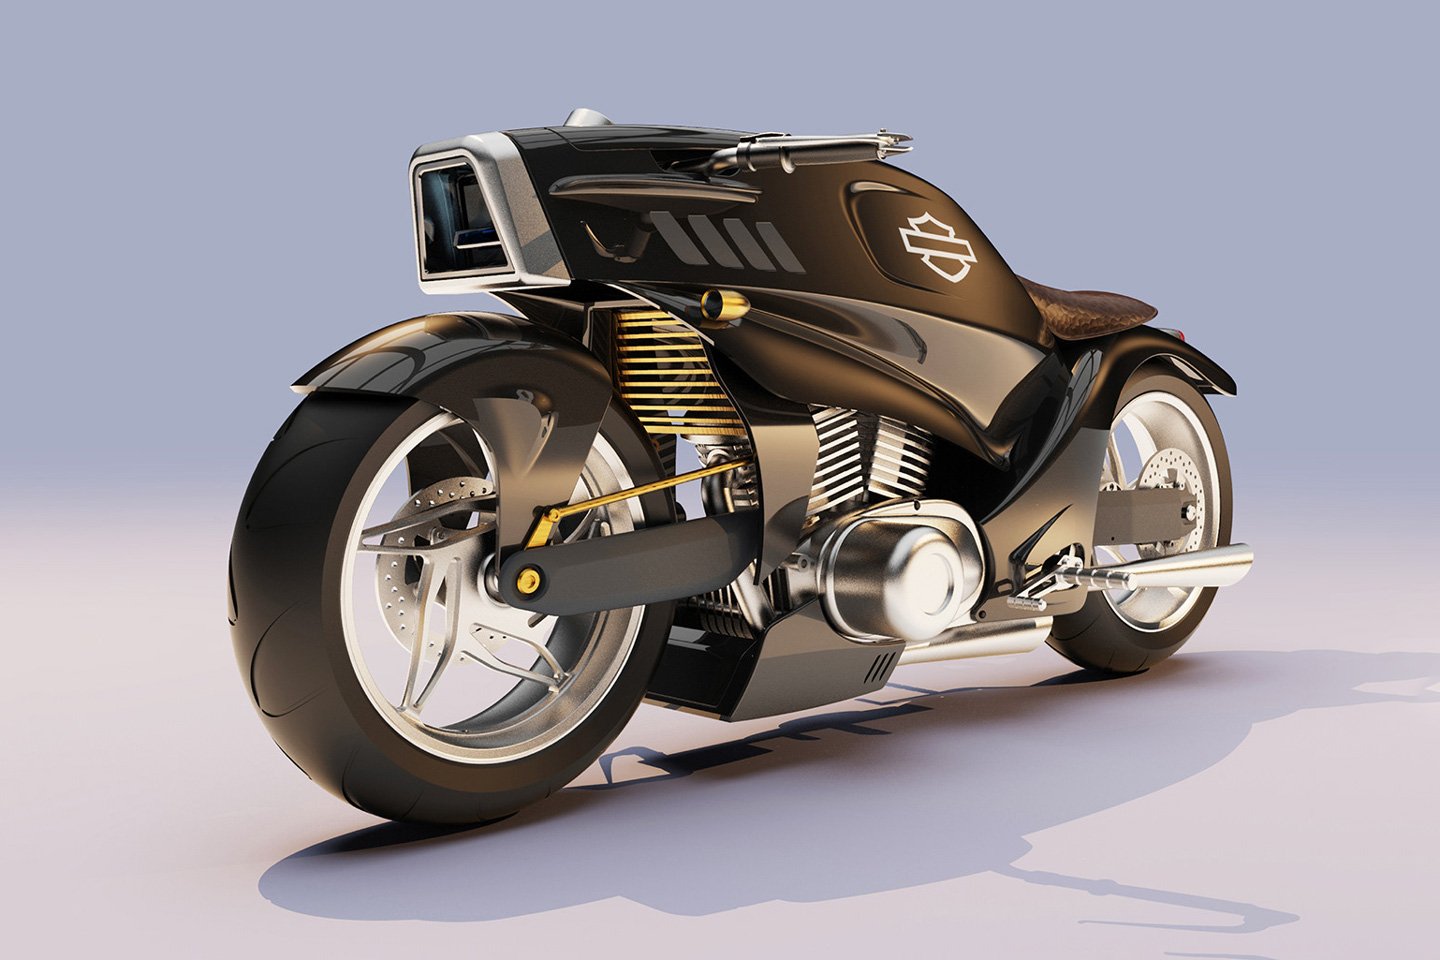 #The Harley-Davidson Street Fighter concept brings streamlined car-like proportions to motorbike design